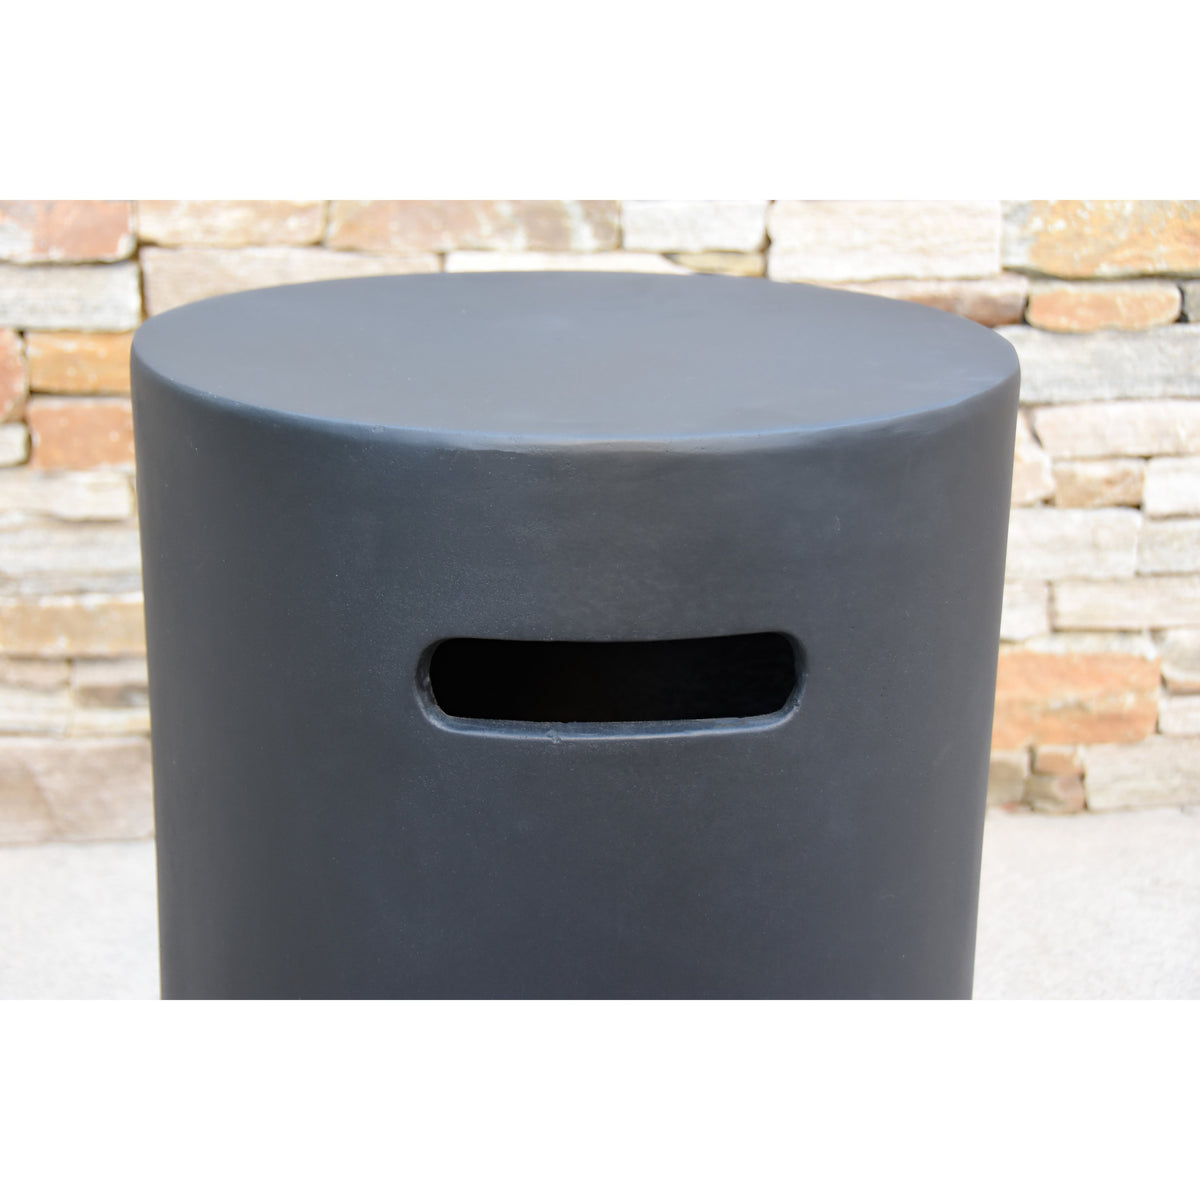 Elementi Round Tank Cover in Dark Gray for Lunar Bowl Fire Pit Table